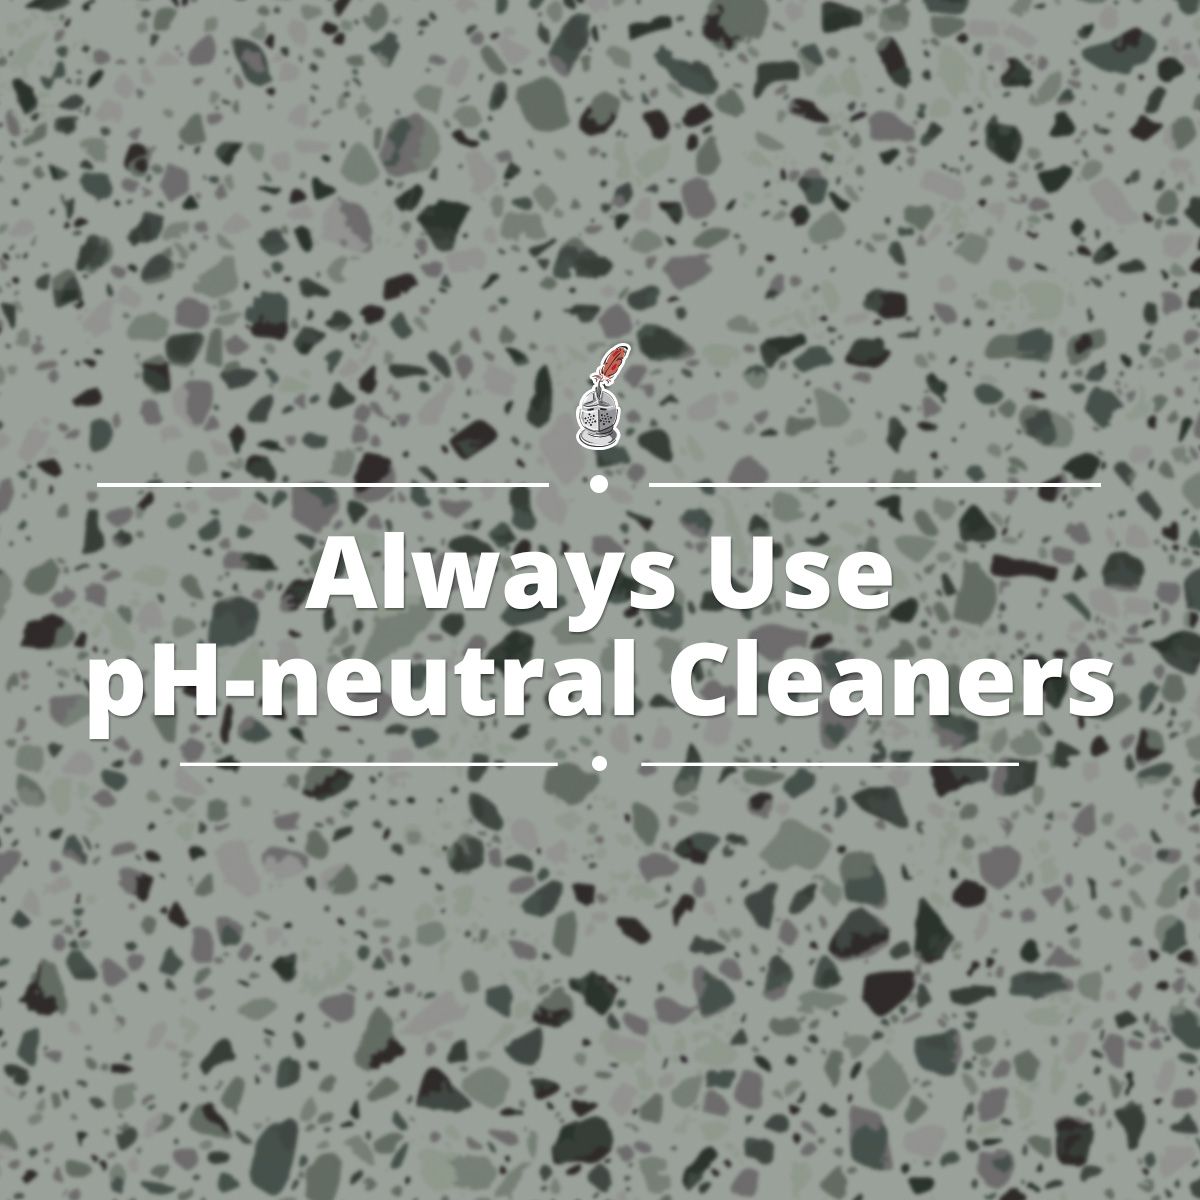 Always Use pH-neutral Cleaners